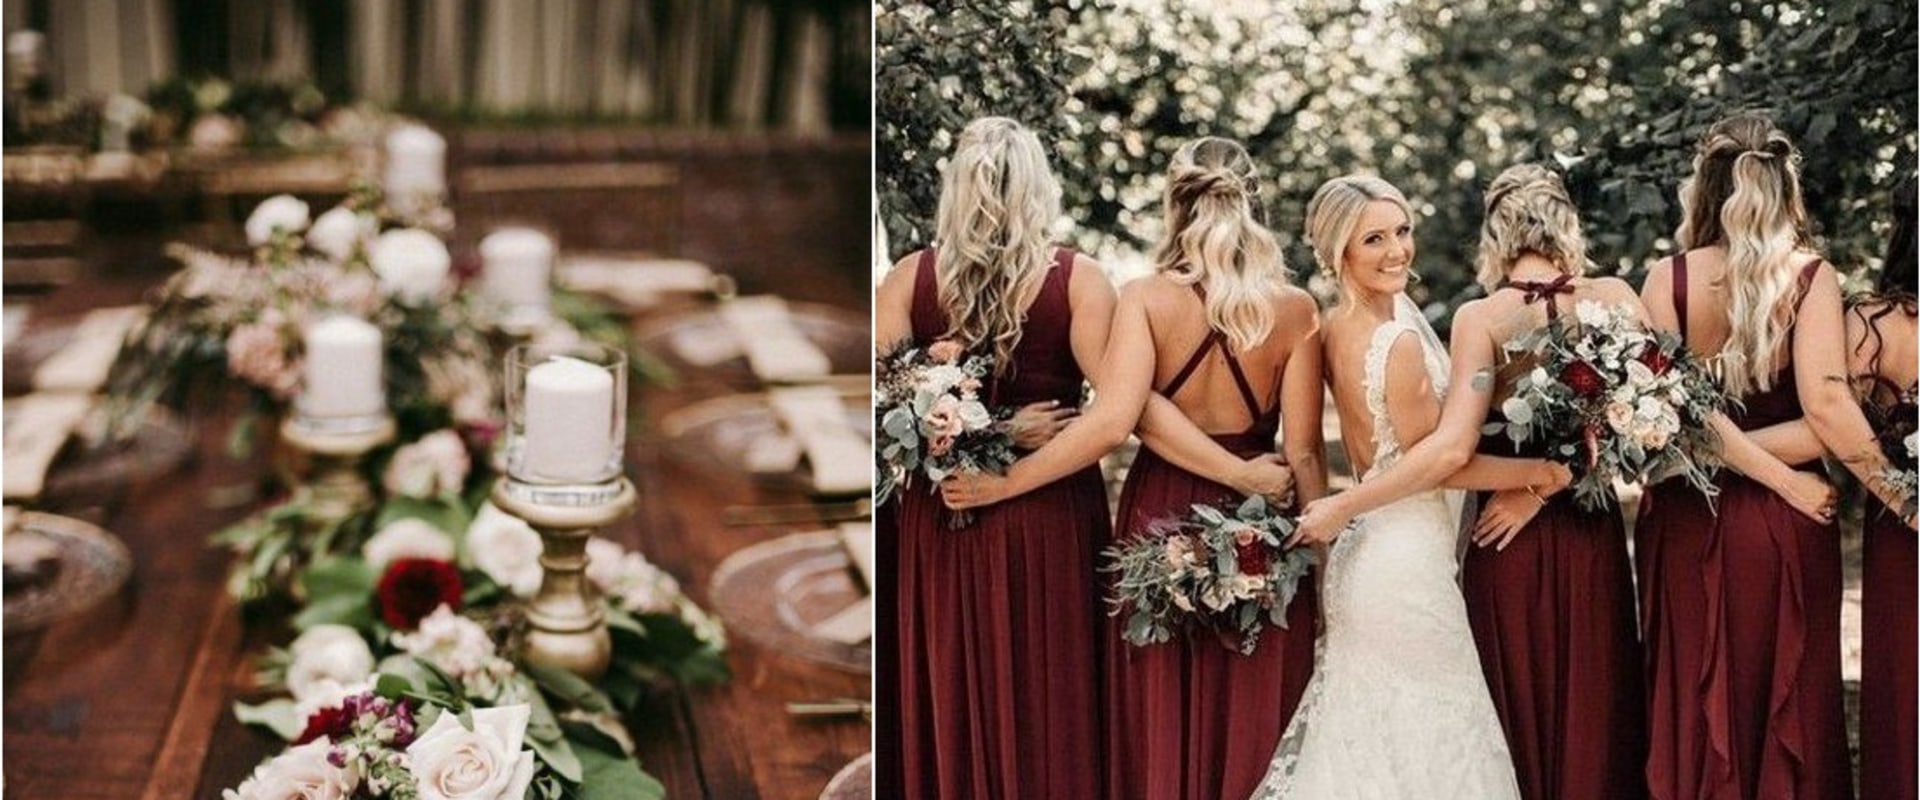 Burgundy and Rose Gold: A Perfect Color Scheme for Your Wedding